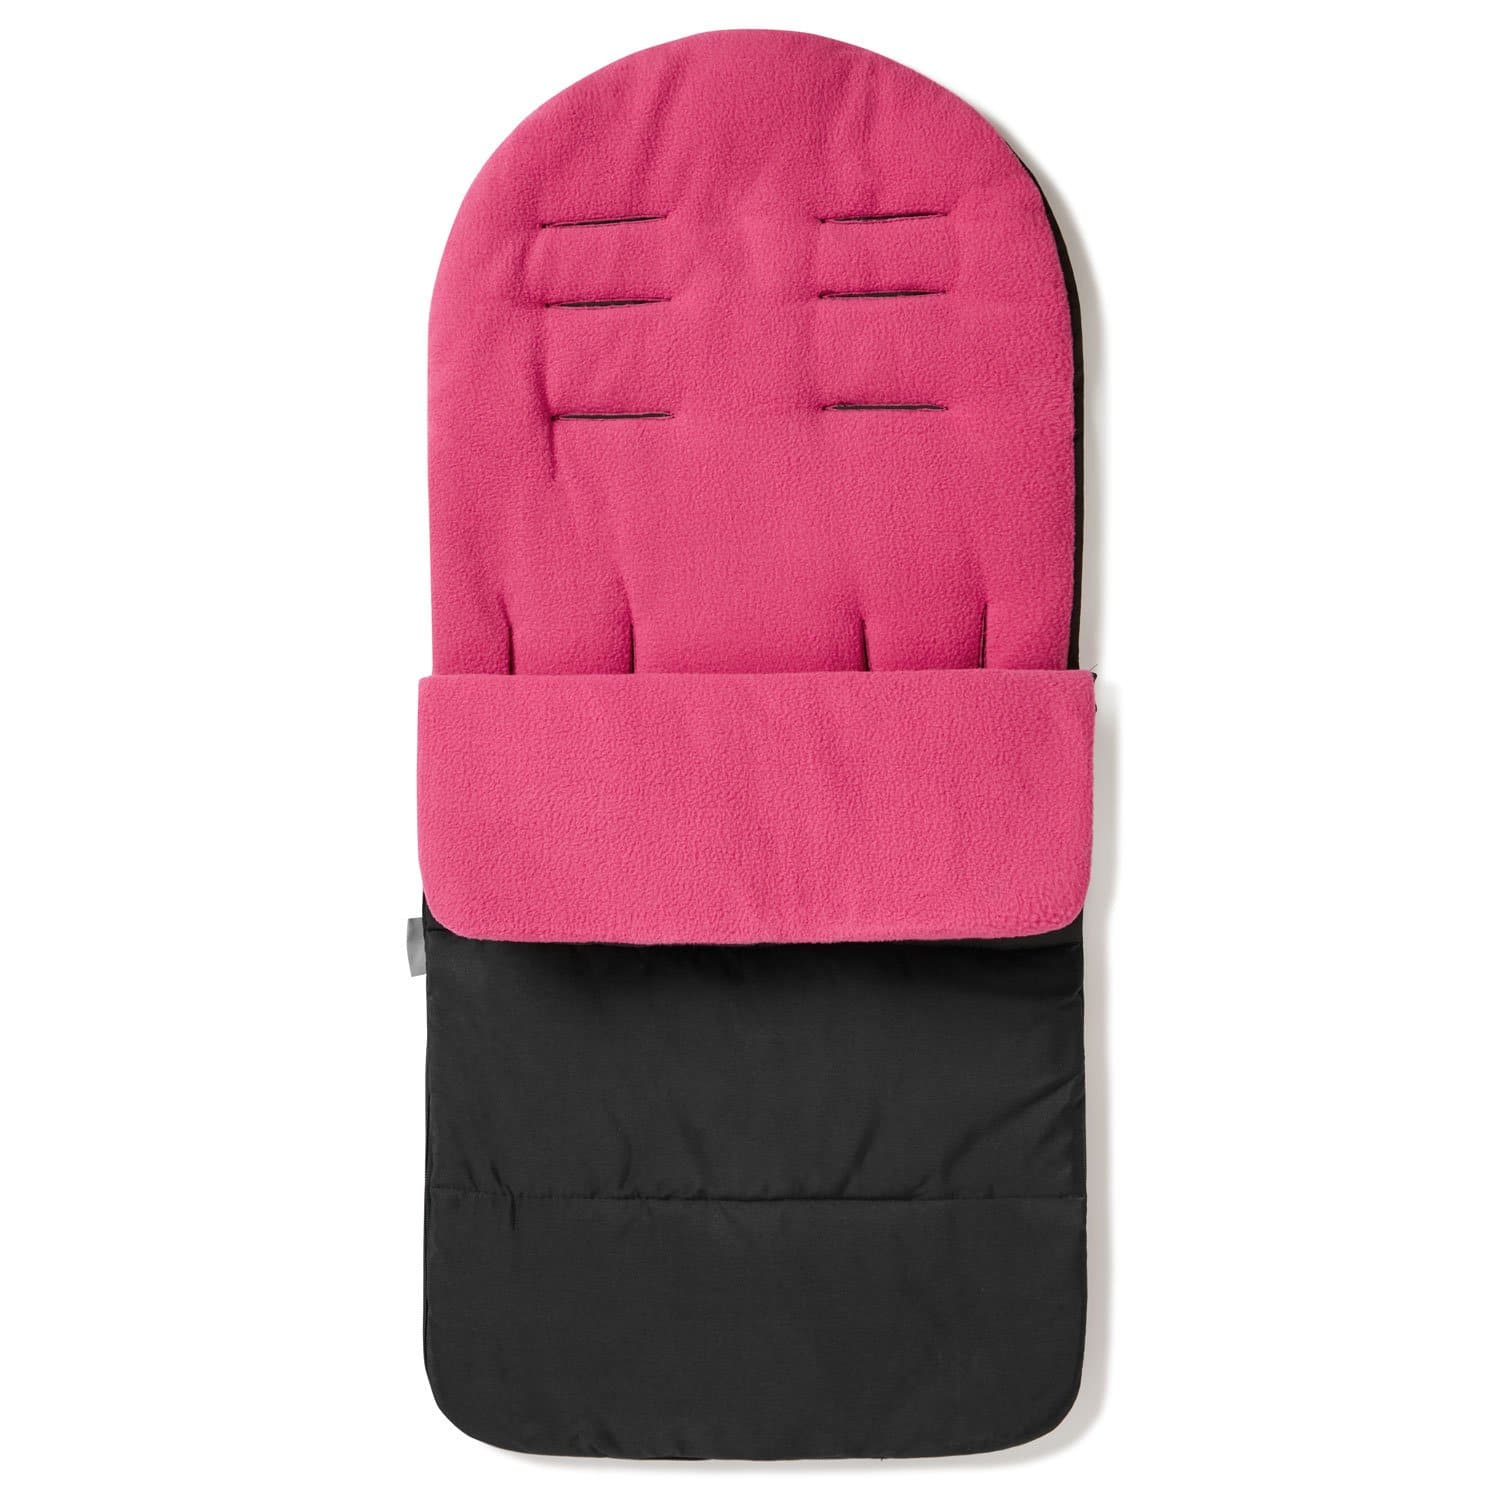 Premium Footmuff / Cosy Toes Compatible with Kids Kargo - Pink Rose / Fits All Models | For Your Little One